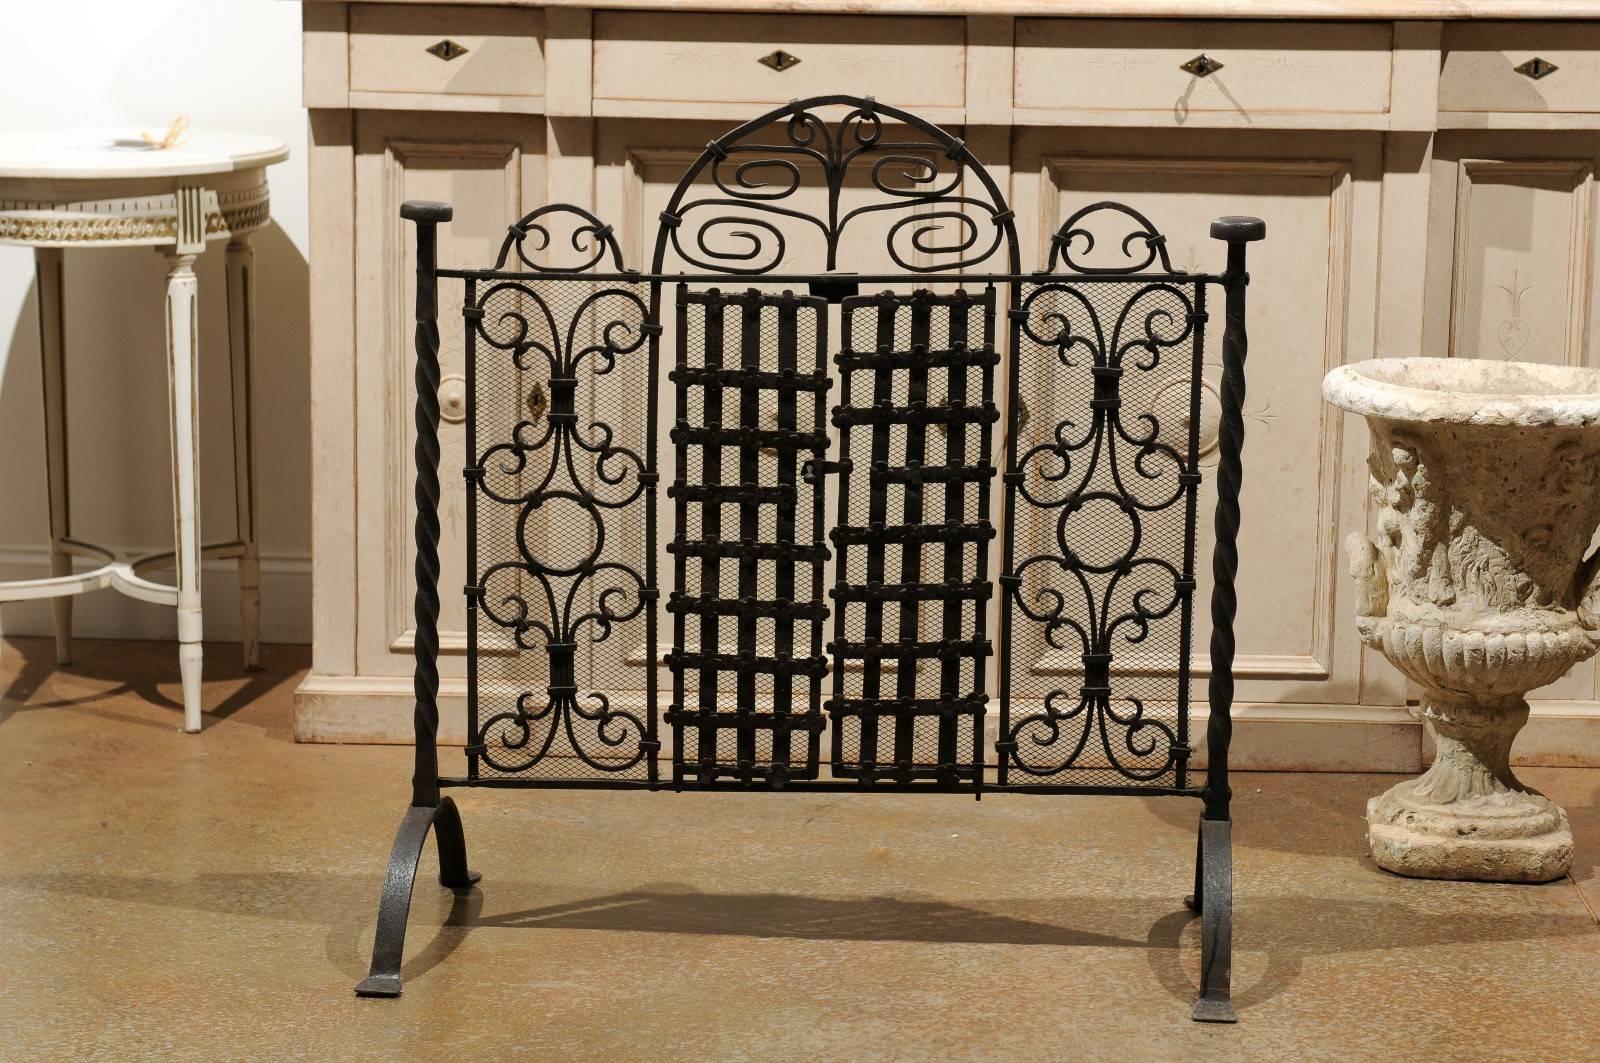 A French wrought iron freestanding firescreen with two central operational doors from the 19th century. This French firescreen features a wrought iron armature made of two lateral twisted supports. Our attention is immediately drawn to the central